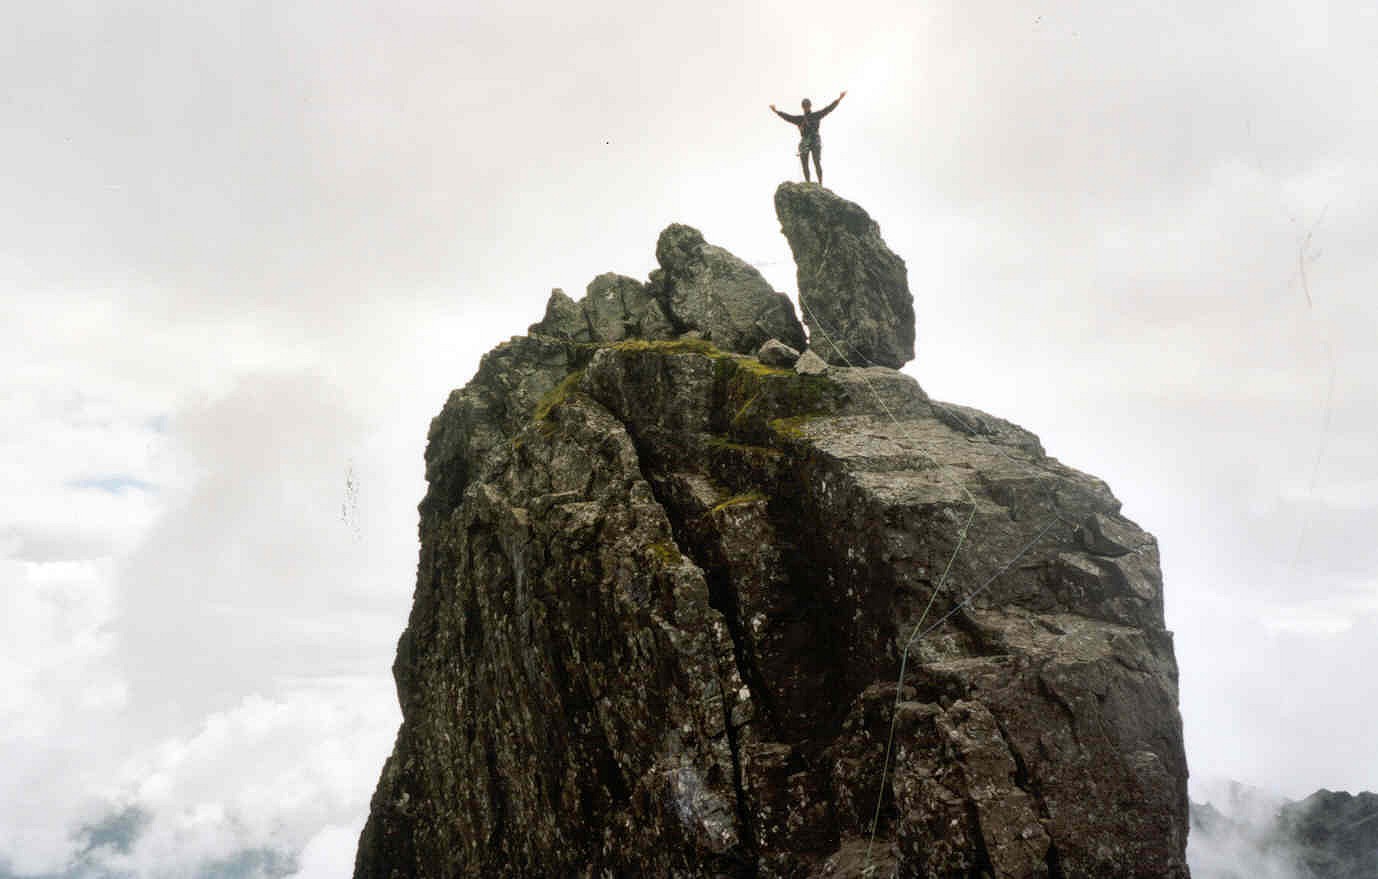 Munro Bagging on Skye - atop the In Pin on the Cuillin Ridge  © Dave Collier